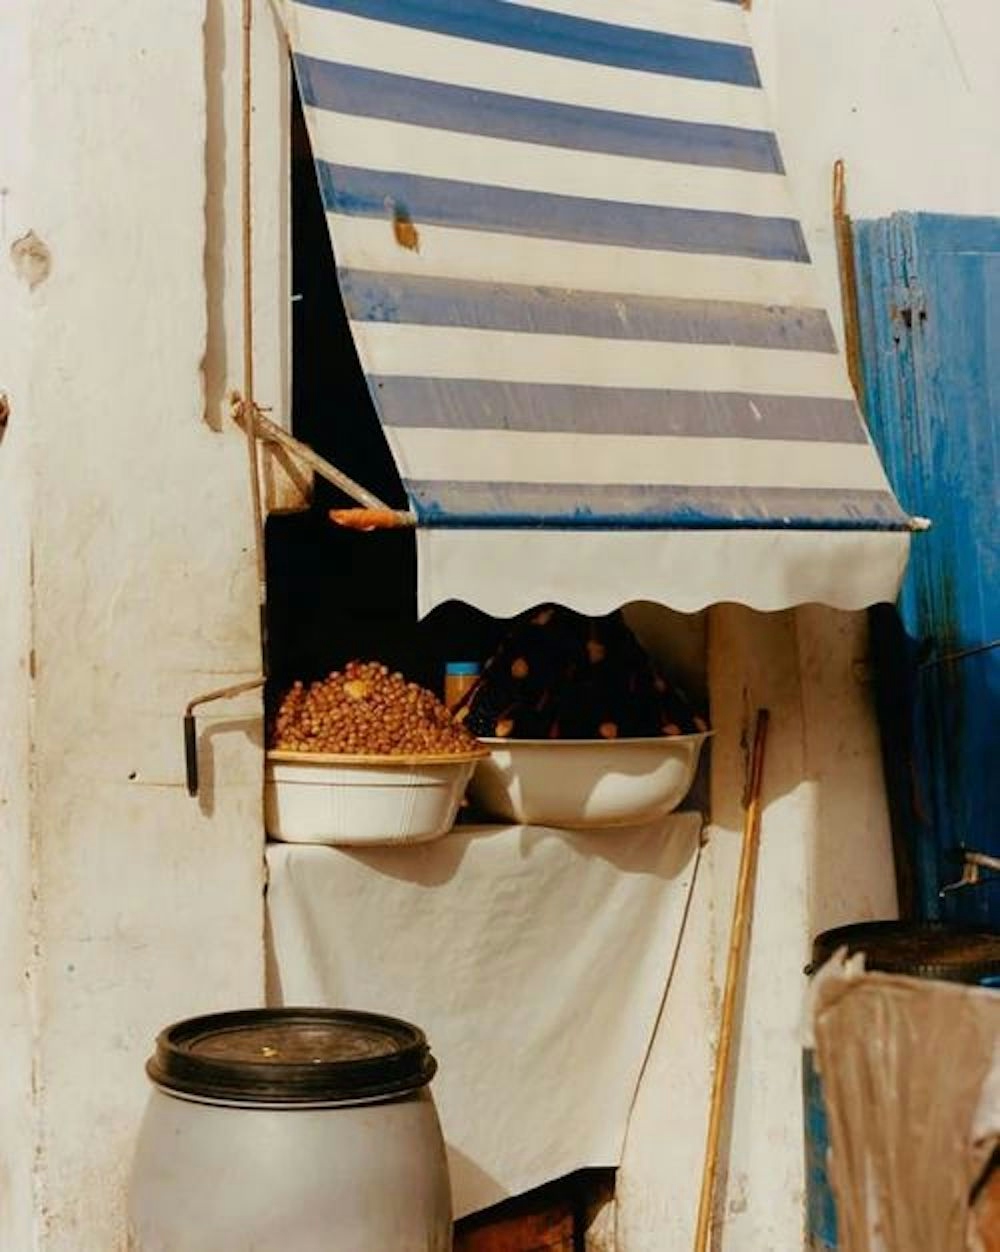 Moroccan market stall exterior, photographer unknown